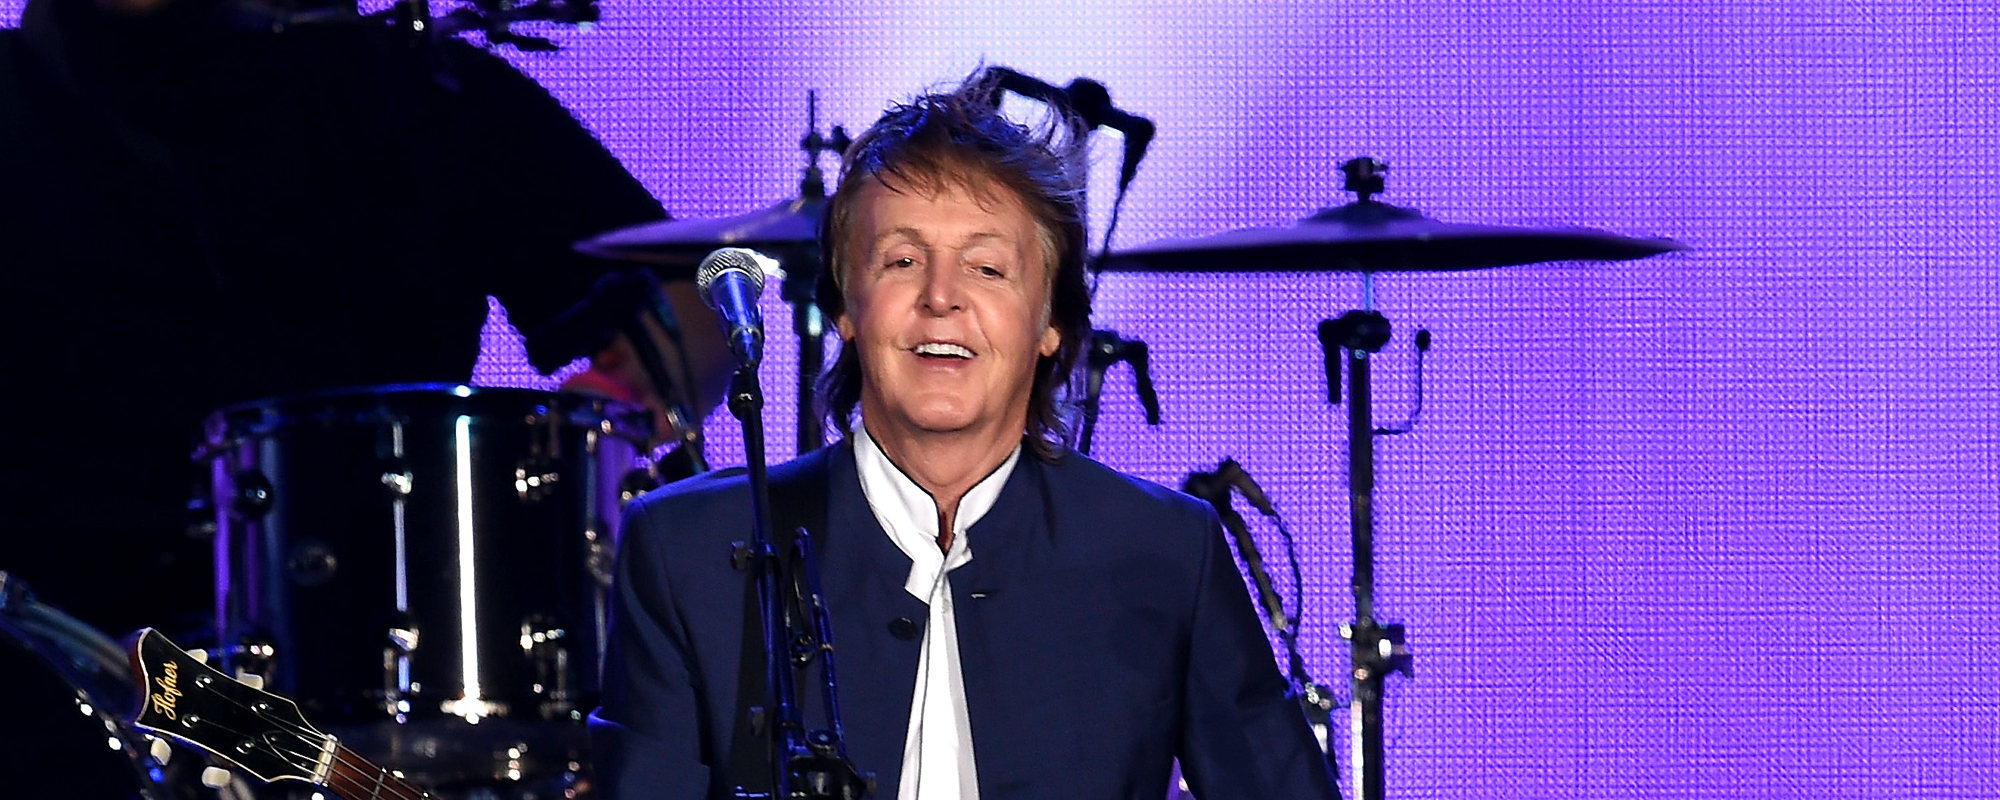 Paul McCartney Shares Which Historical Figure Helped Inspire The Beatles Hit “Let It Be”